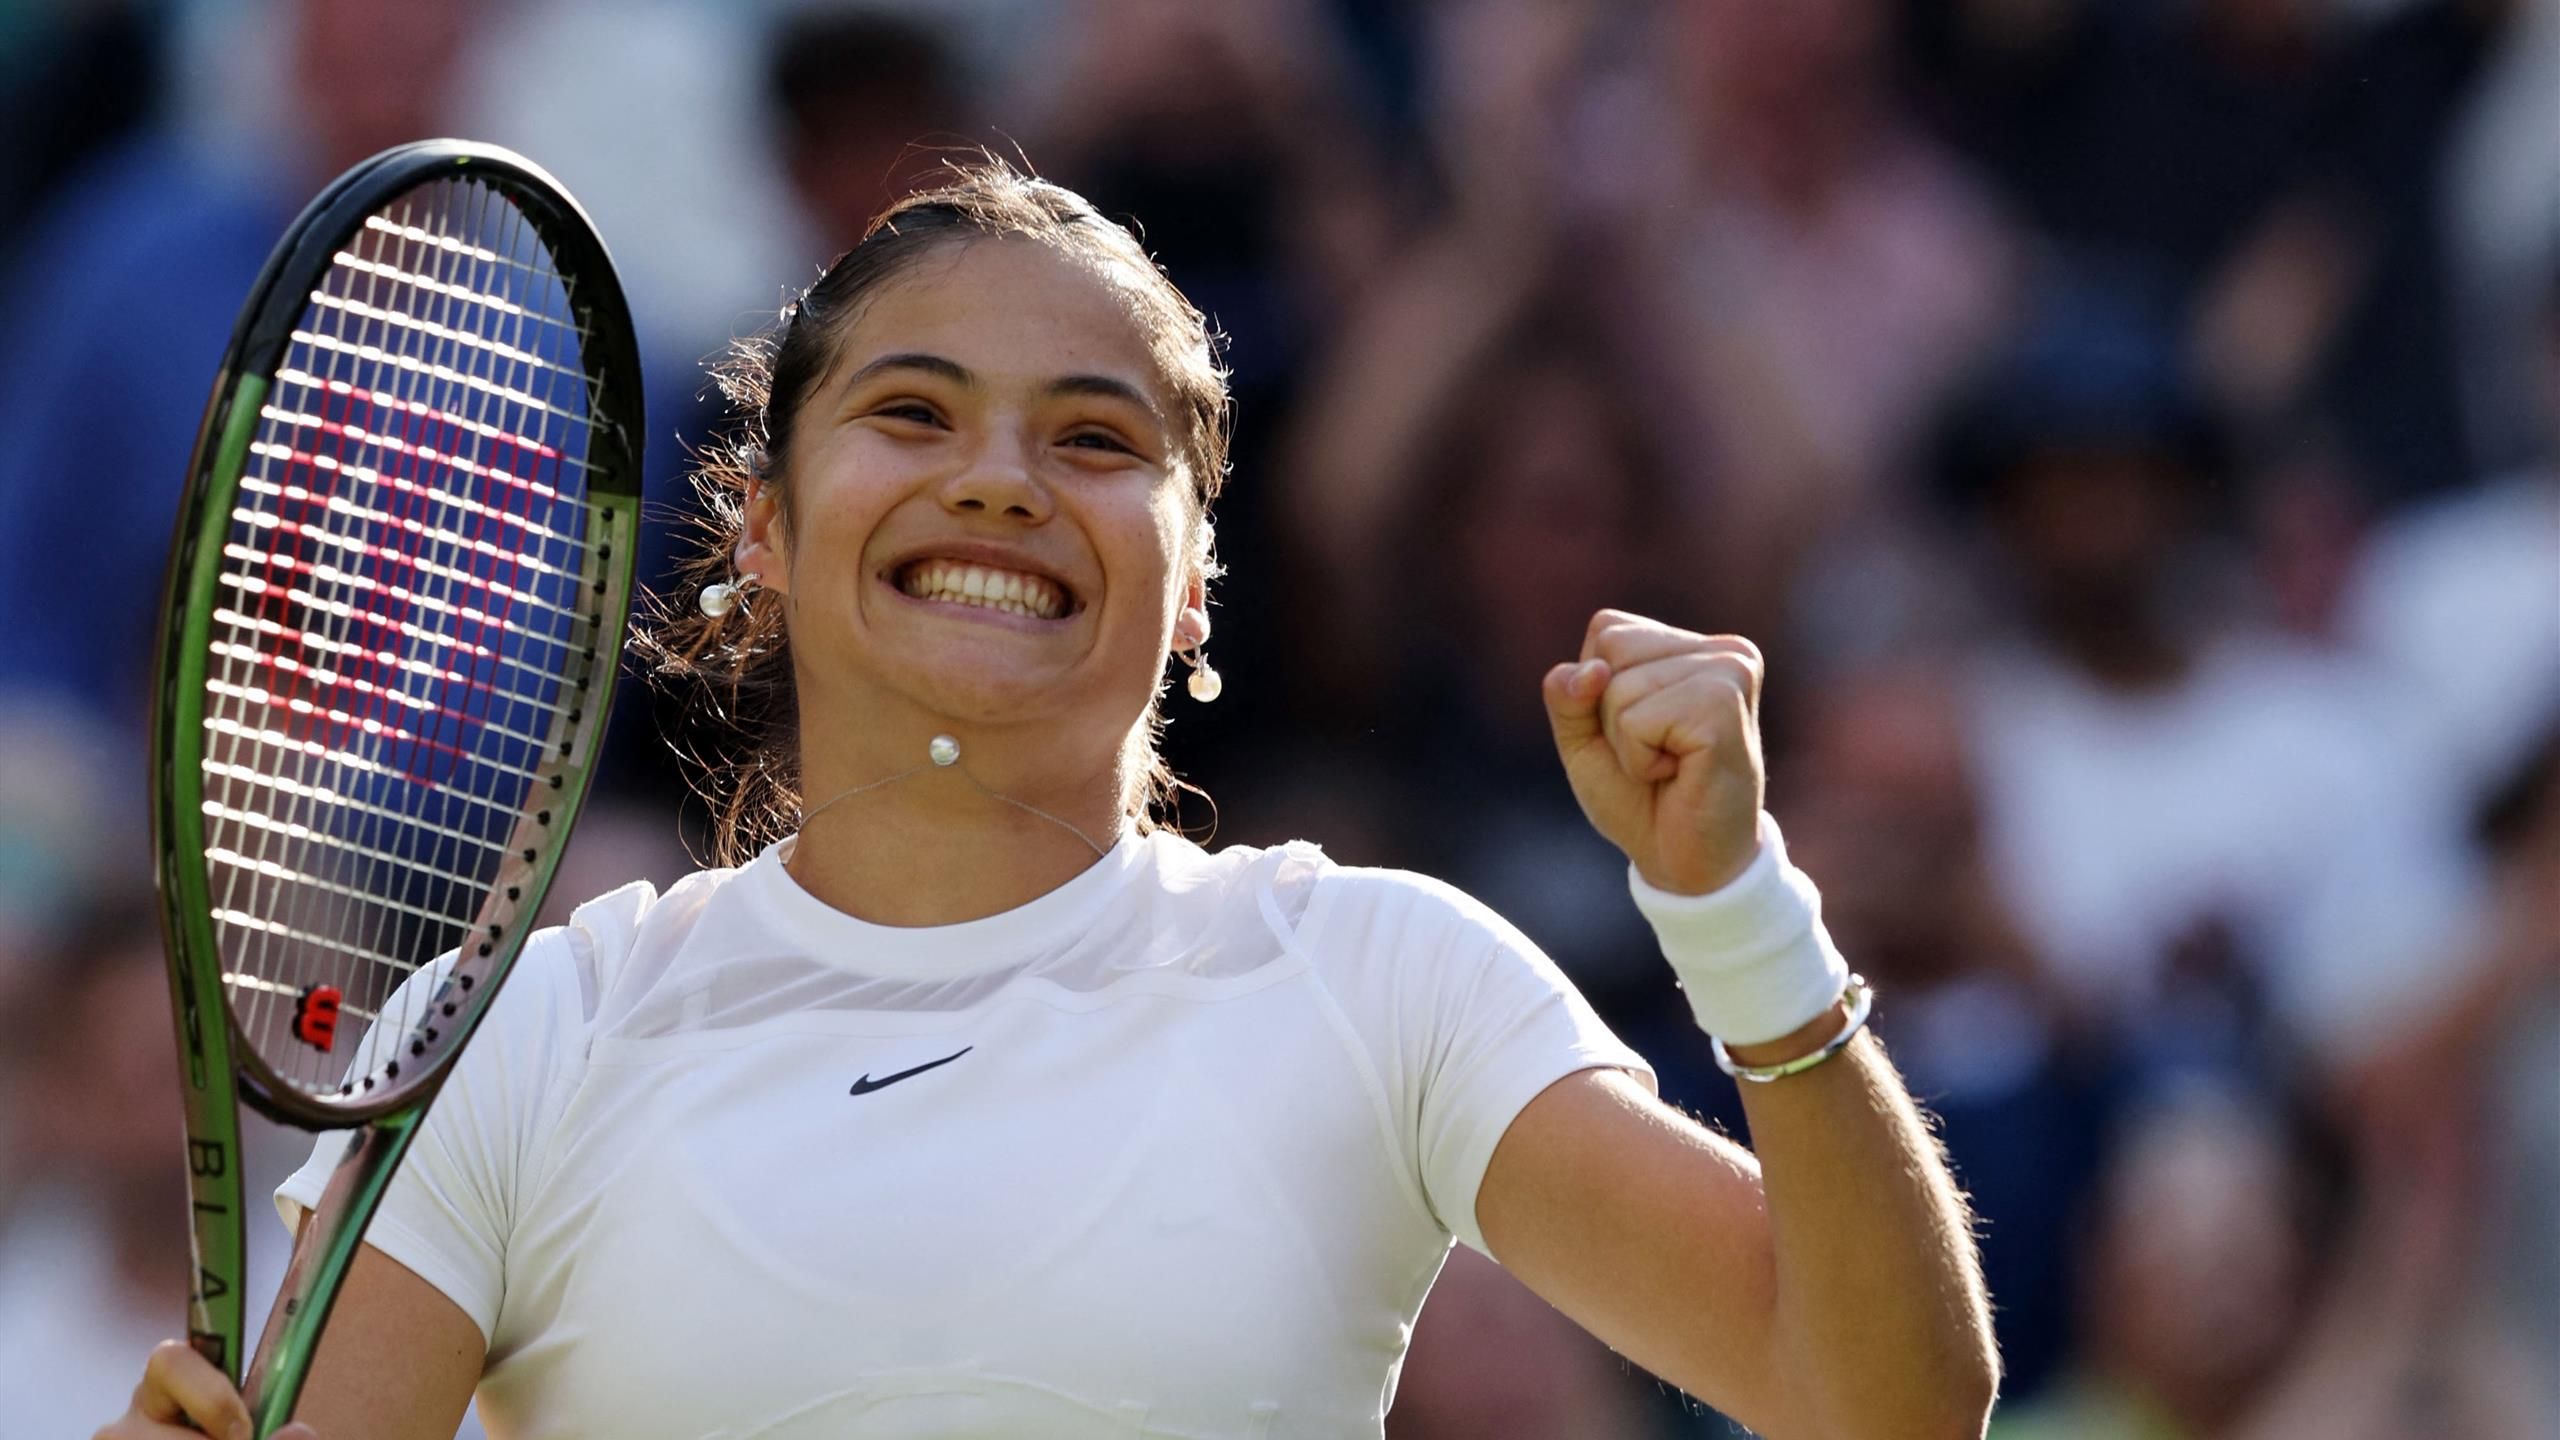 Britains Emma Raducanu delights home fans with opening victory over Alison van Uytvanck at Wimbledon 2022